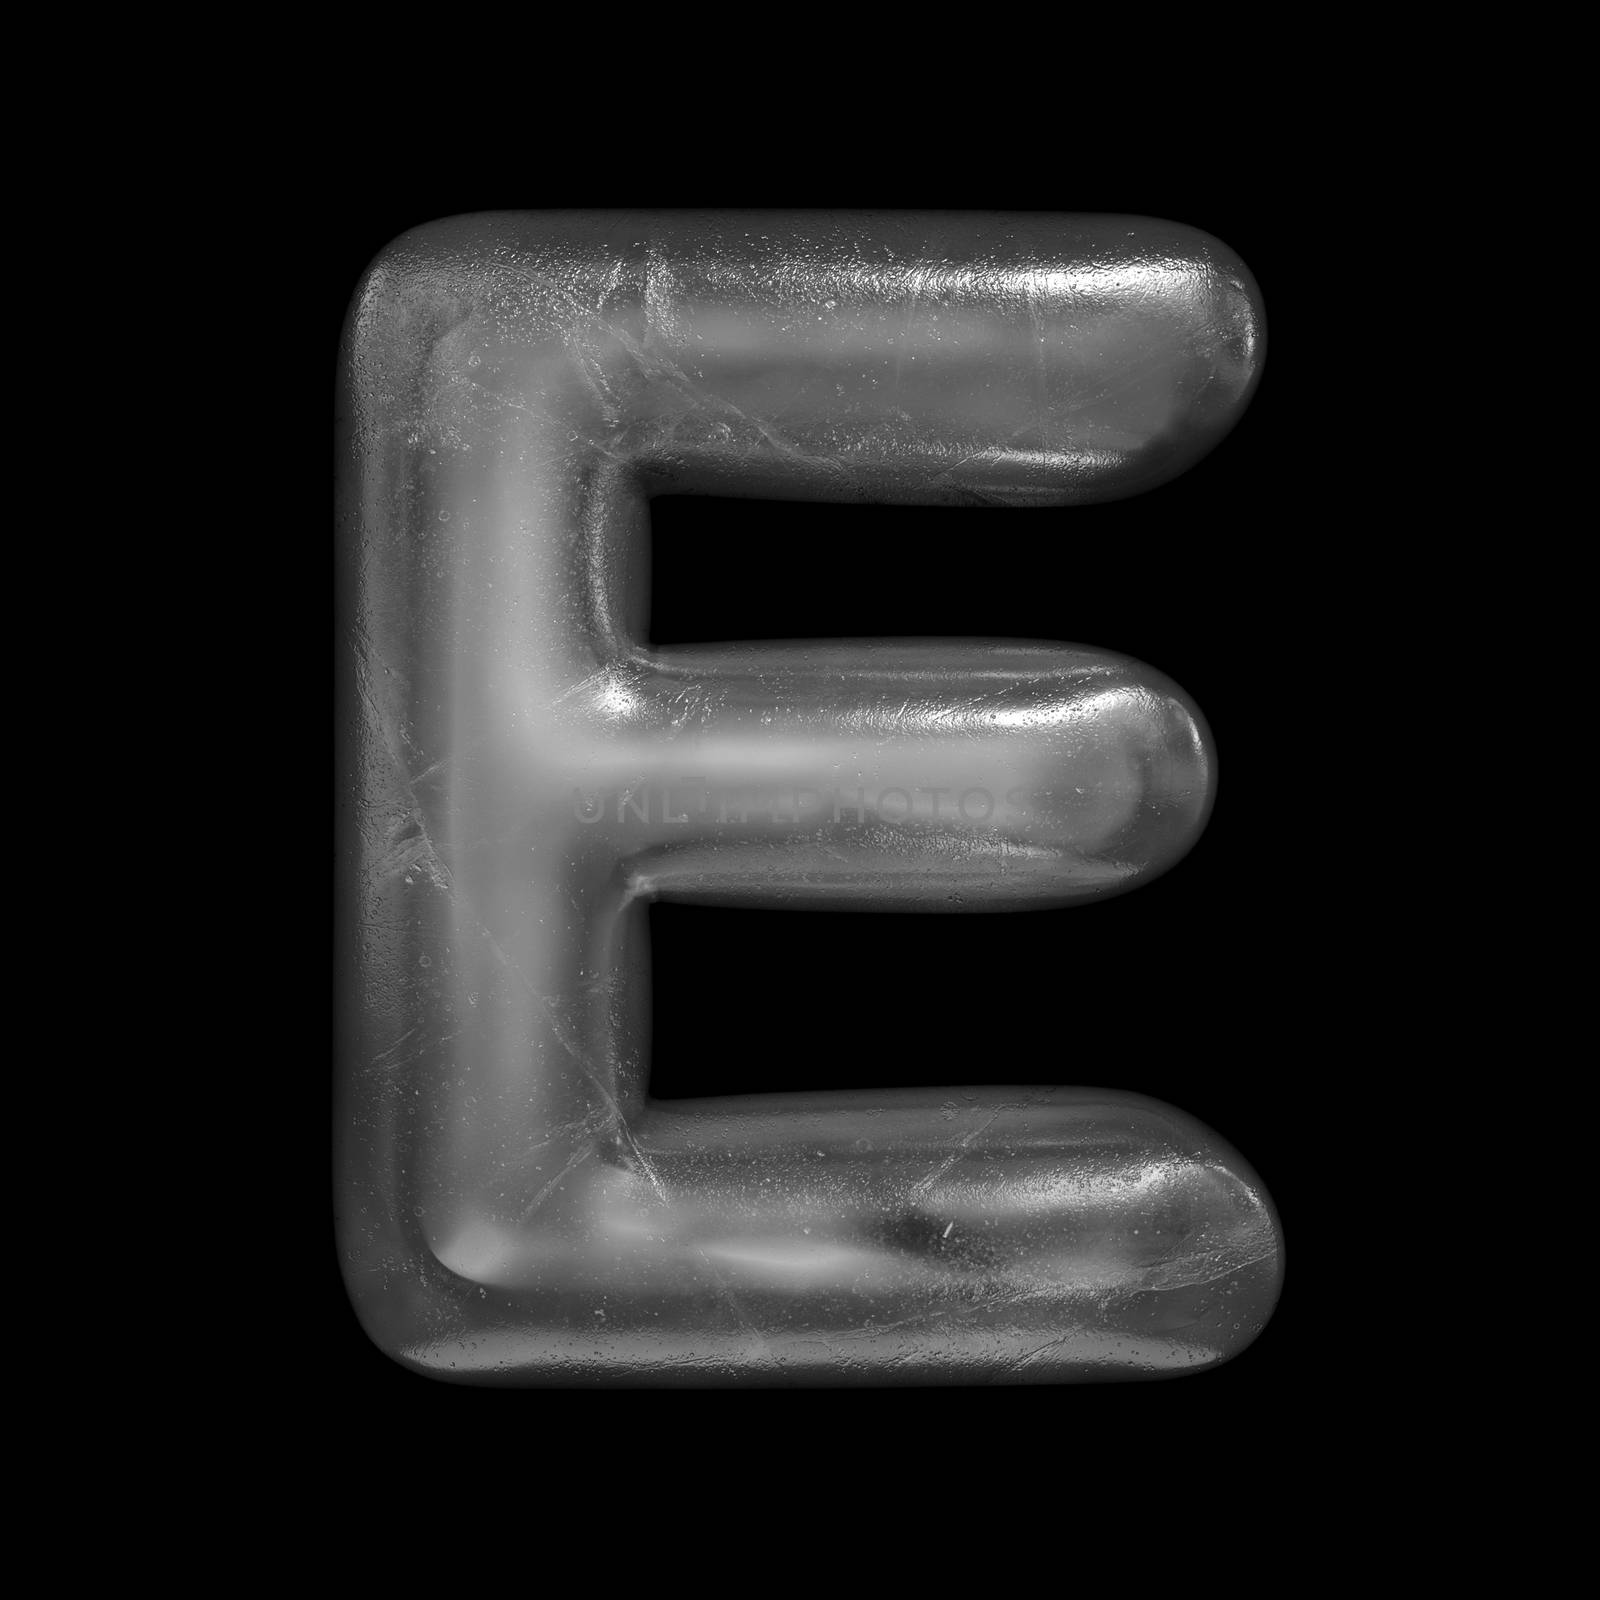 Ice letter E - Capital 3d Winter font - suitable for Nature, Winter or Christmas related subjects by chrisroll